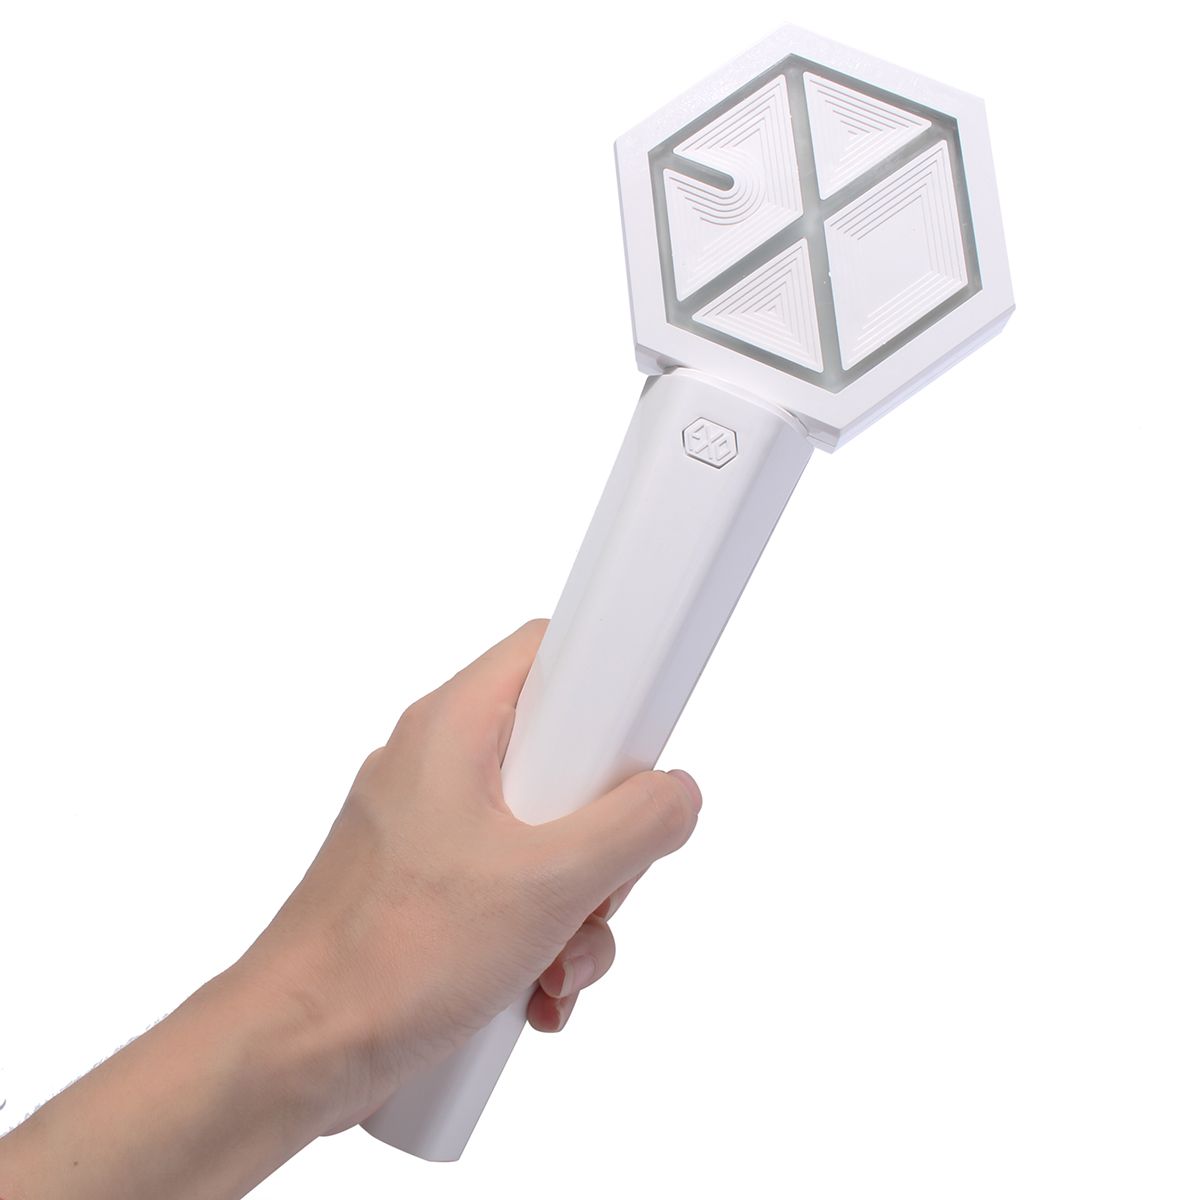 Concert-Ver-20-Lamp-Glow-Lightstick-Gifts-Decorations-For-KPOP-EXO-Chanyeol-DO-Sehun-1537329